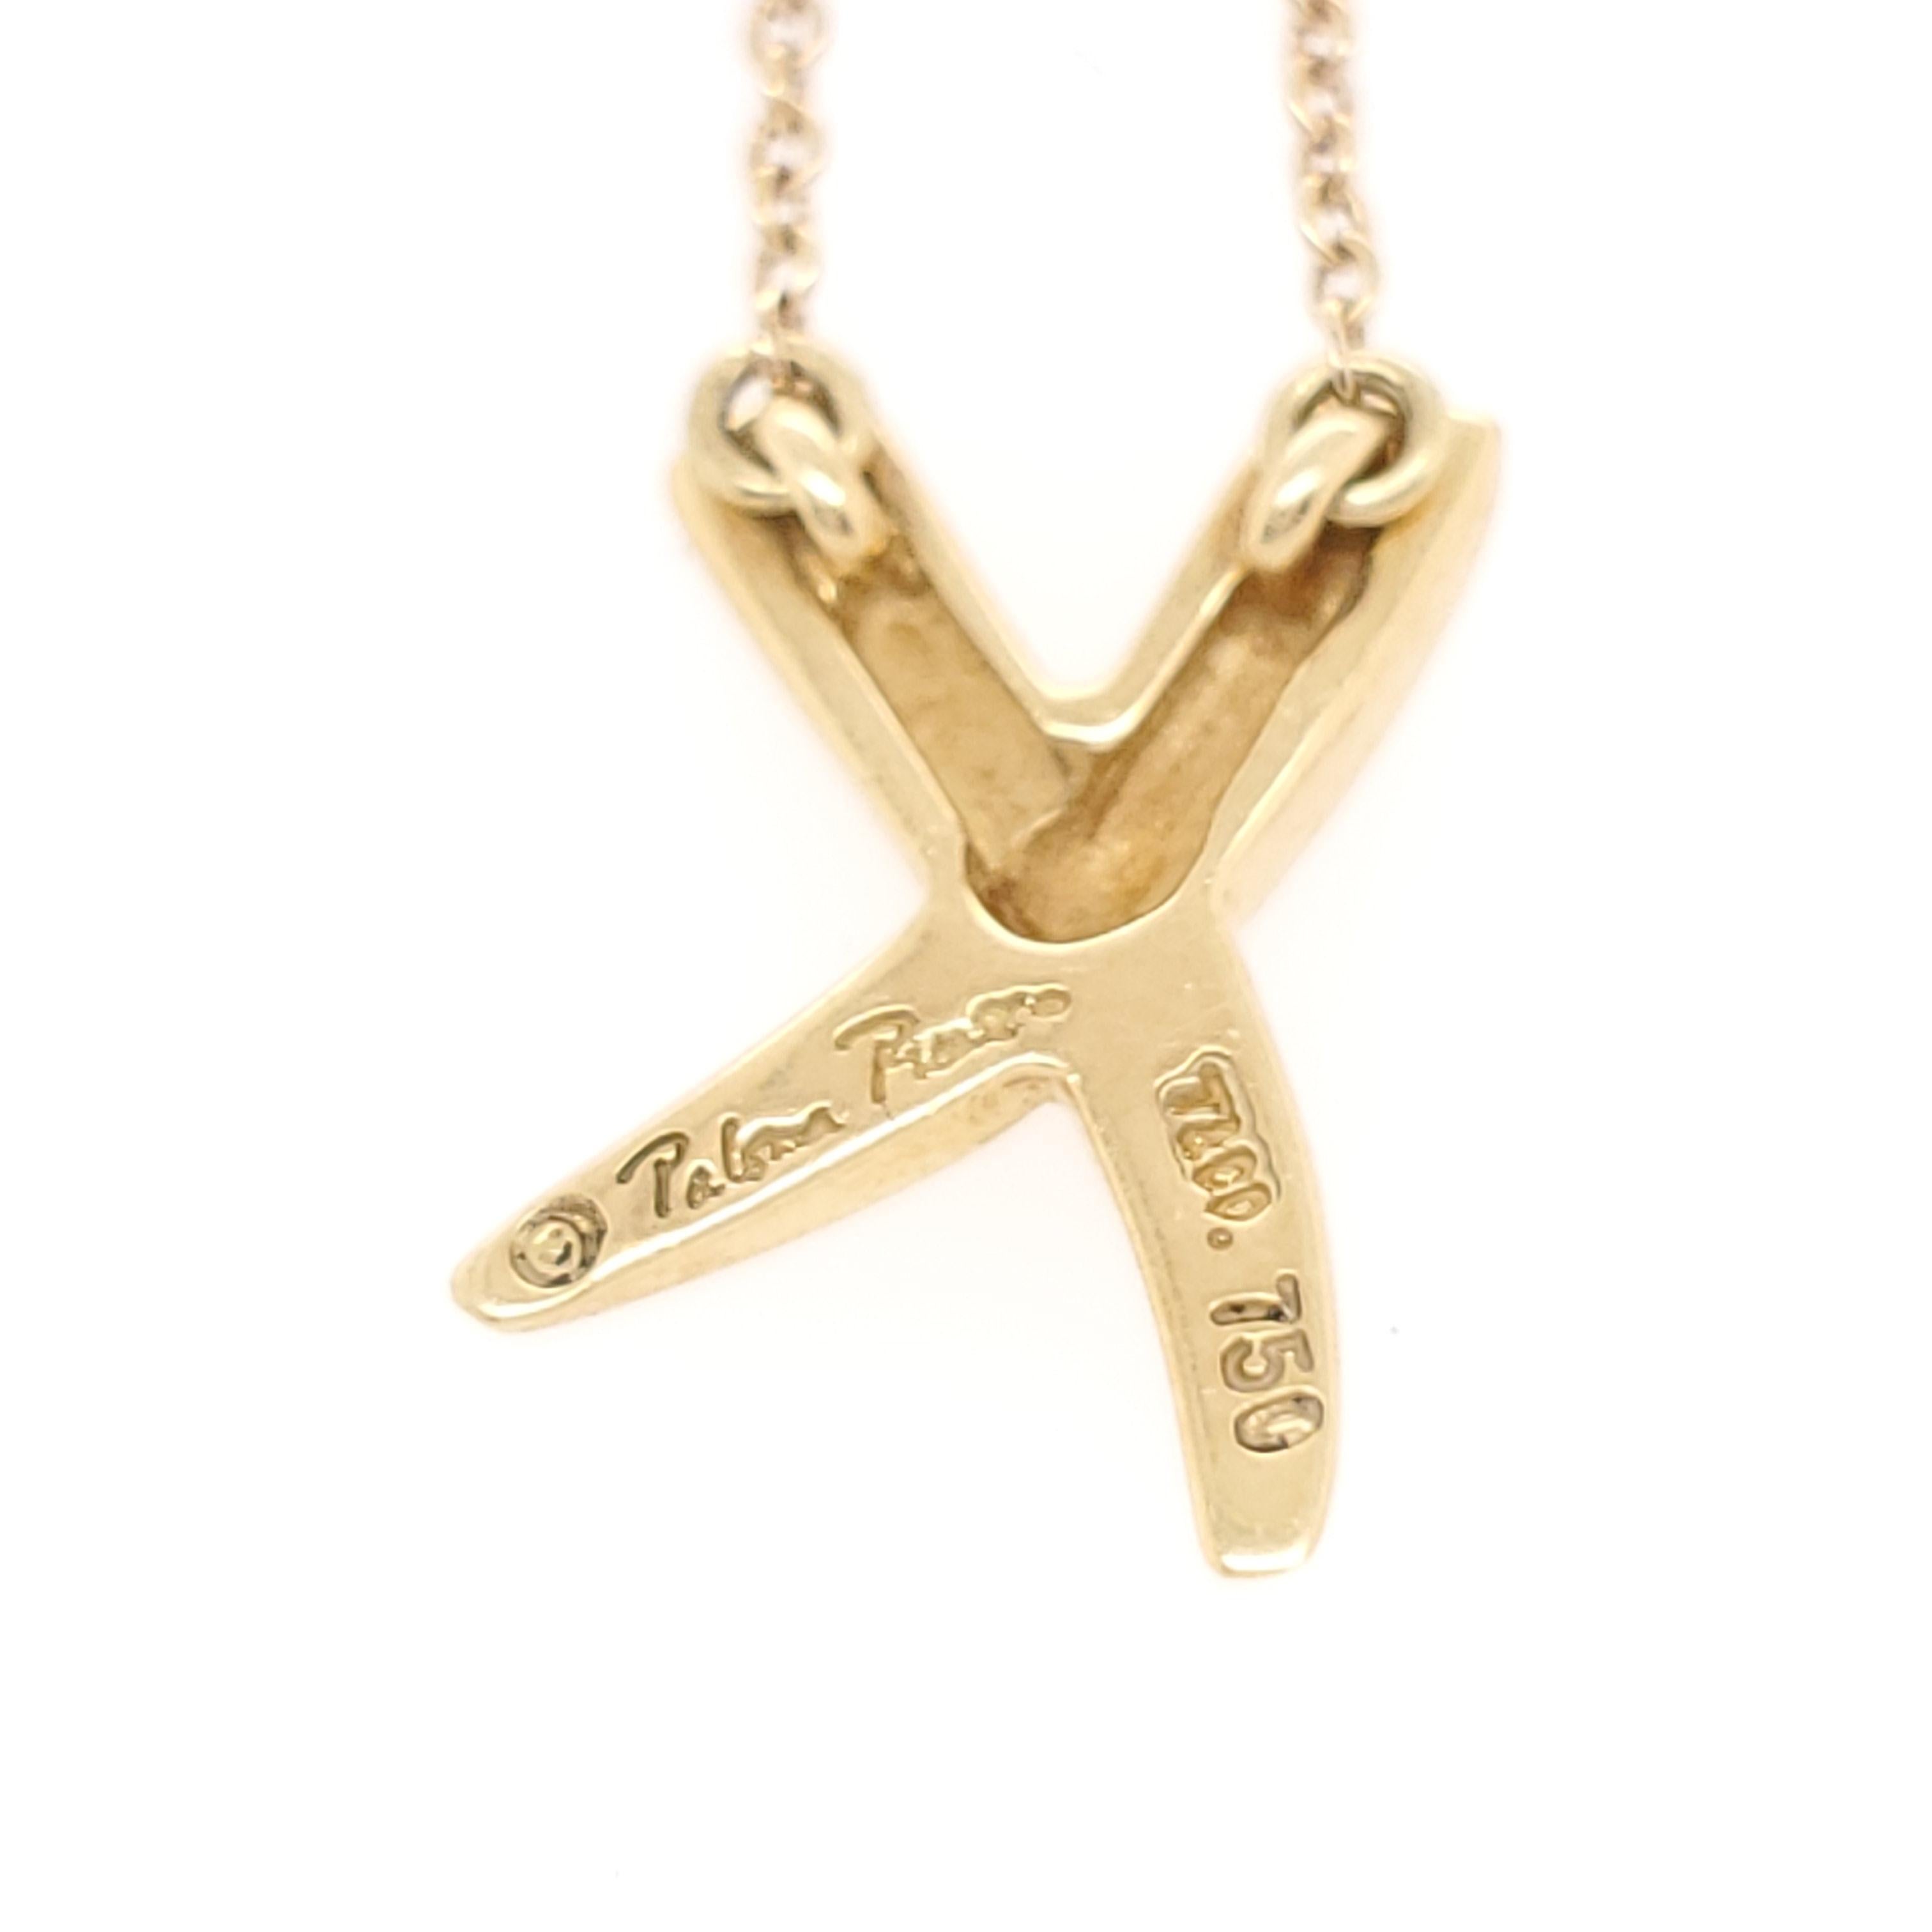 Authentic Paloma Picasso for Tiffany & Co.18 karat yellow gold small graffiti 'x' pendant necklace. The pendant measures 16mm x 11mm and the necklace is 14 3/4 inches in length. The pendant is signed Paloma Picasso, T&Co, 750. Necklace clasp is